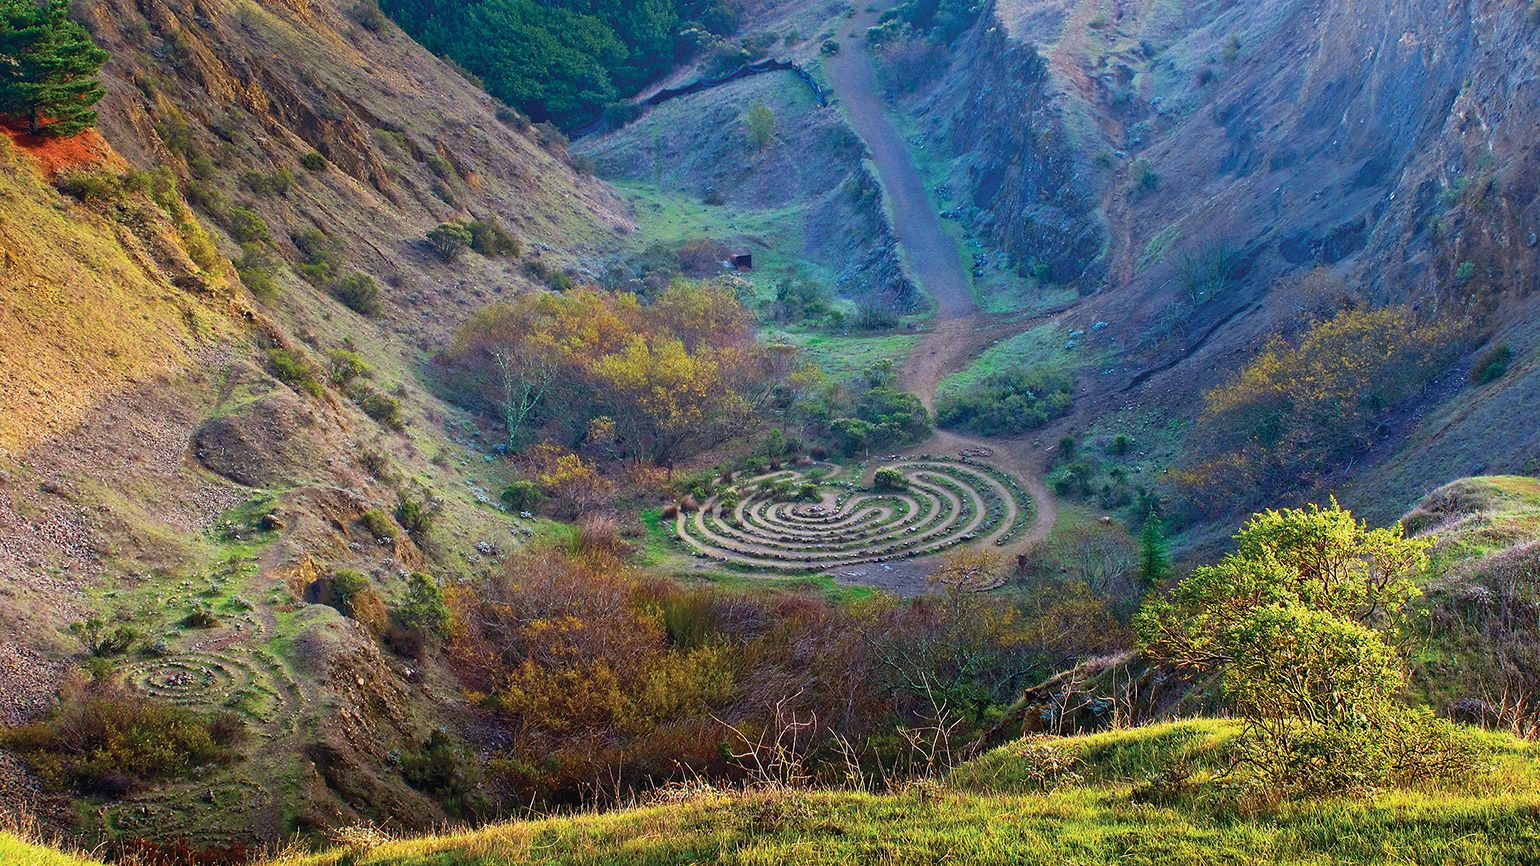 The labyrinths of the Sibley Volcanic Regional Preserve in Oakland, California